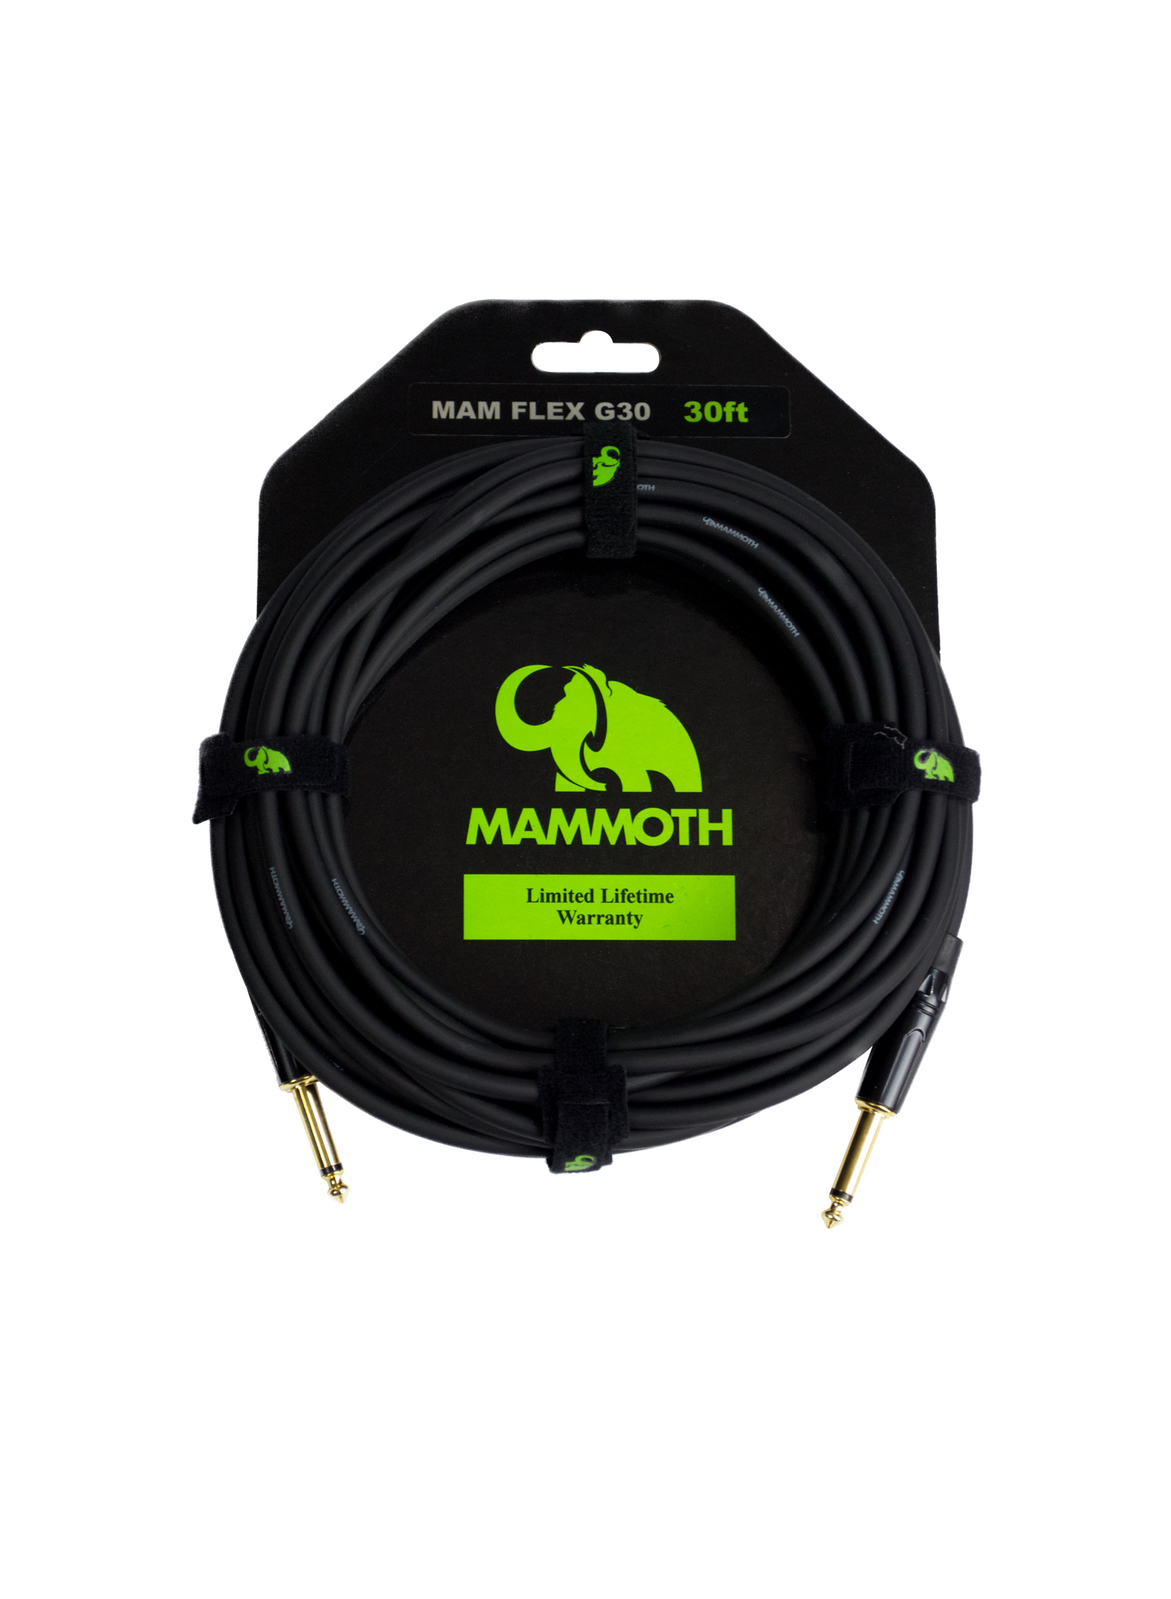 Mammoth Flex G30, 30ft Instrument Cable, Straight Jack to Straight Jack